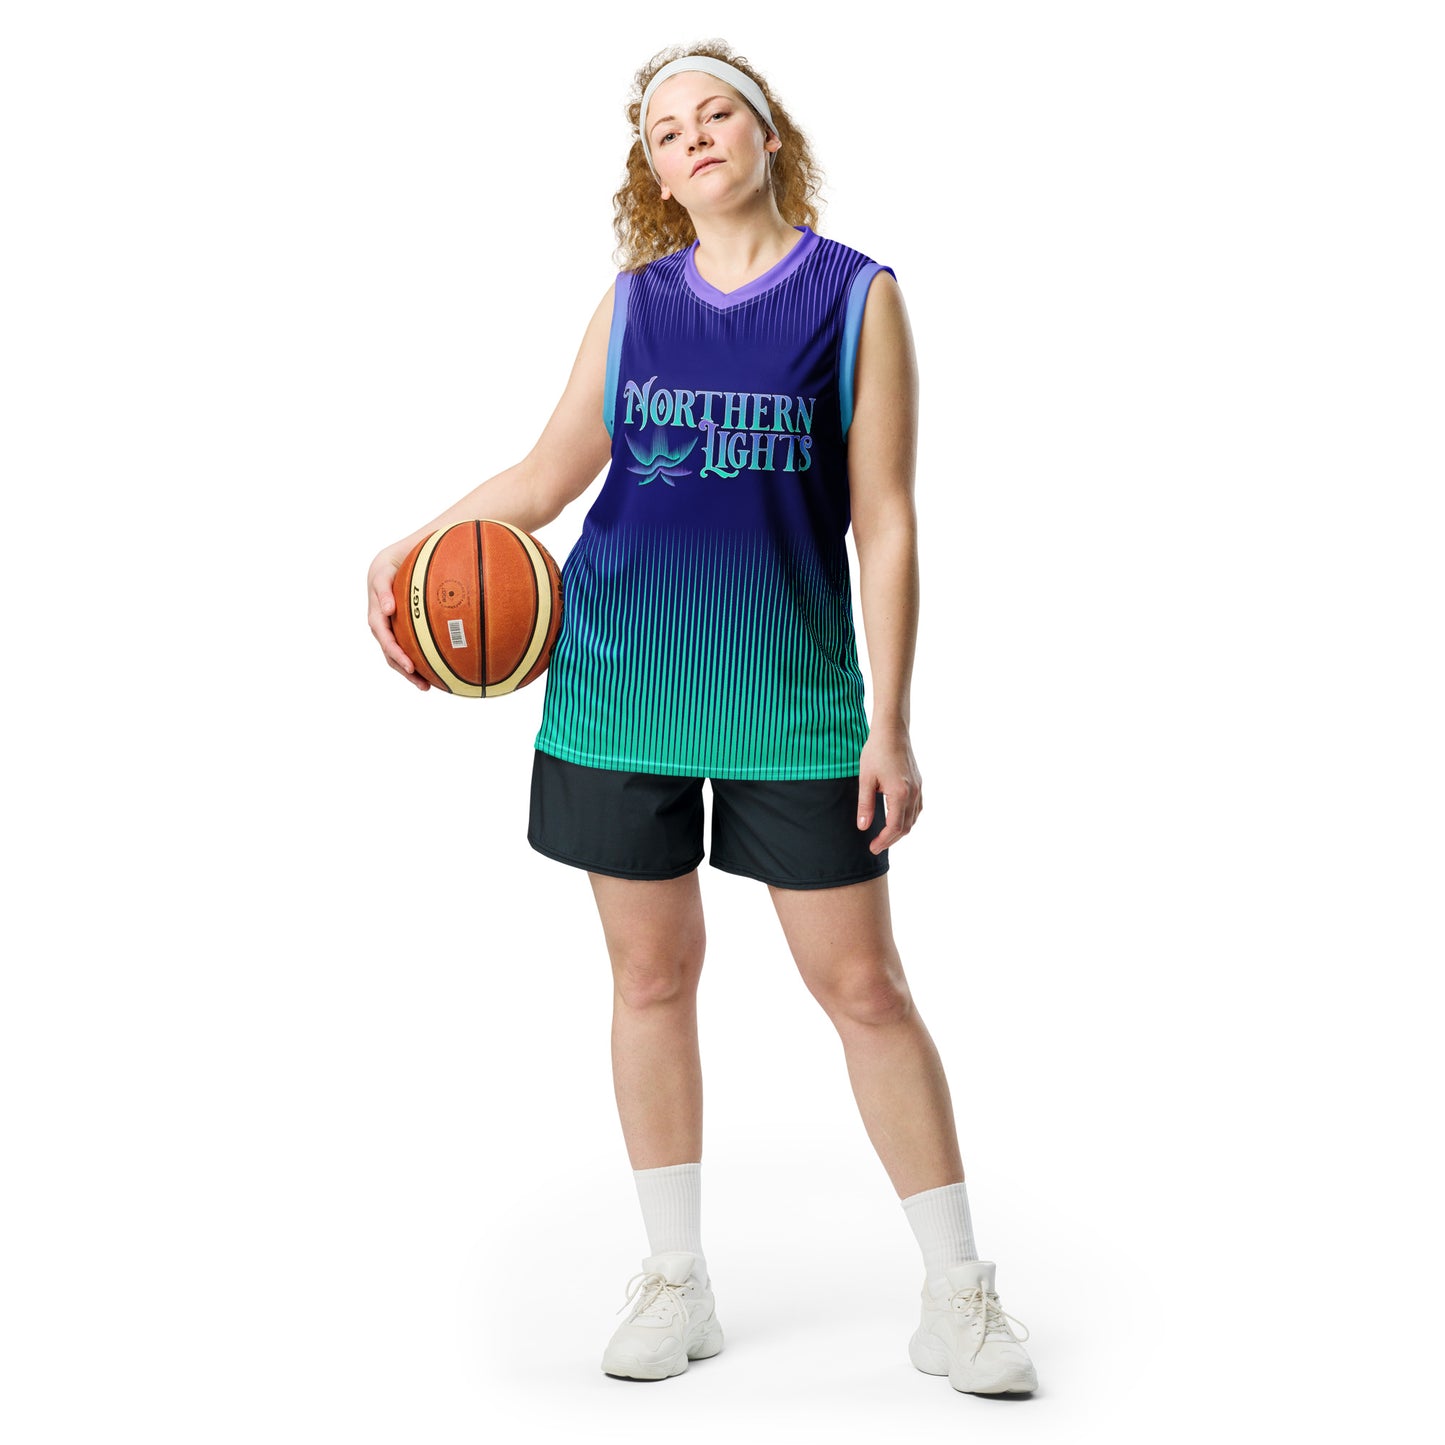 Northern Lights Recycled Unisex Basketball Jersey